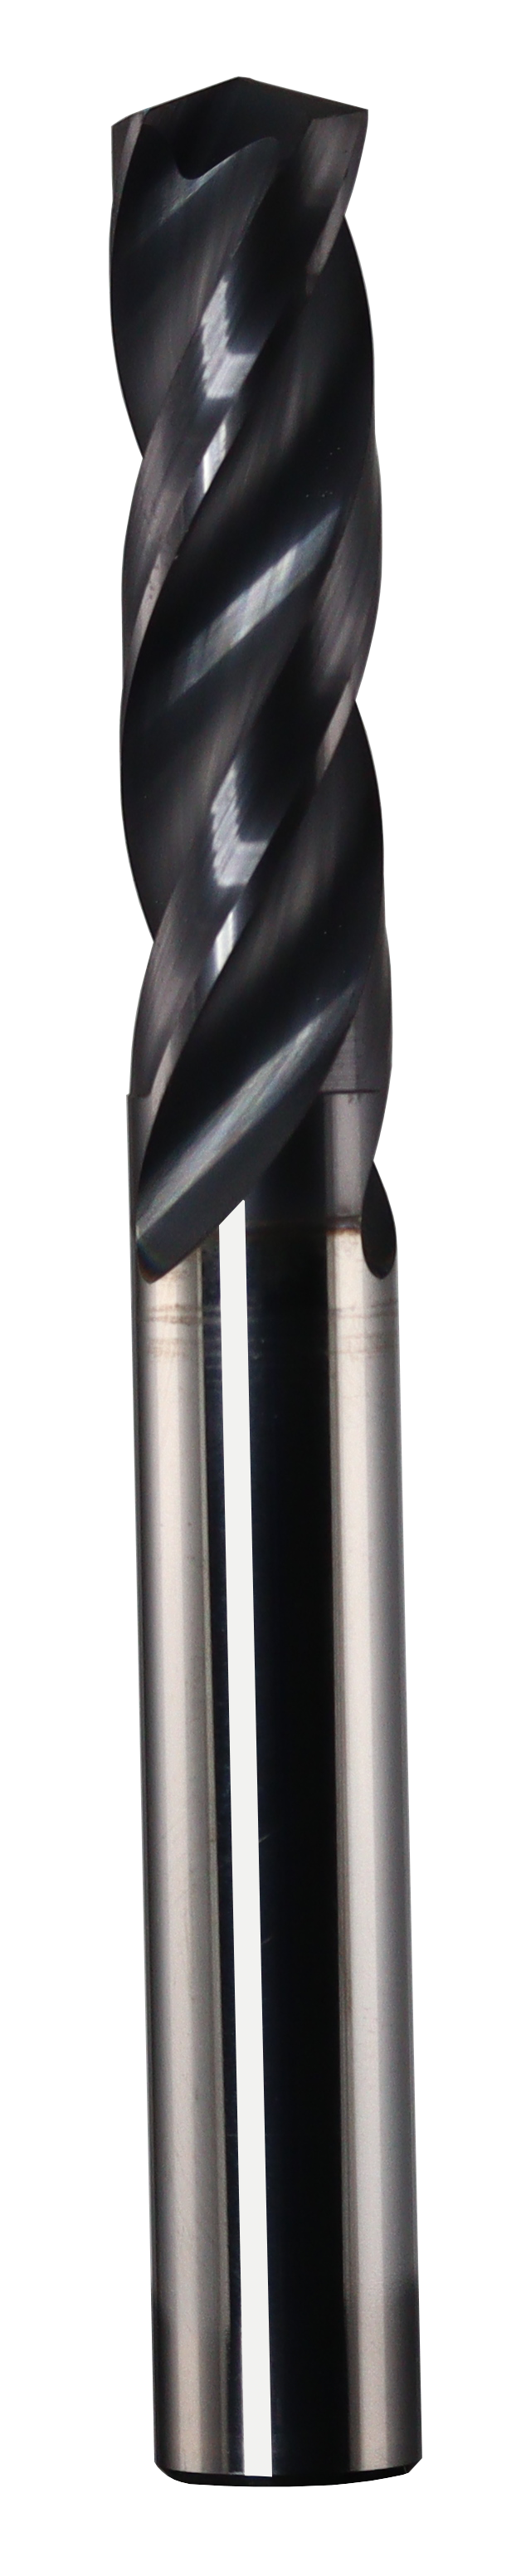 3.90mm Dia, 150 Degree Point, Solid Carbide Drill - 68974